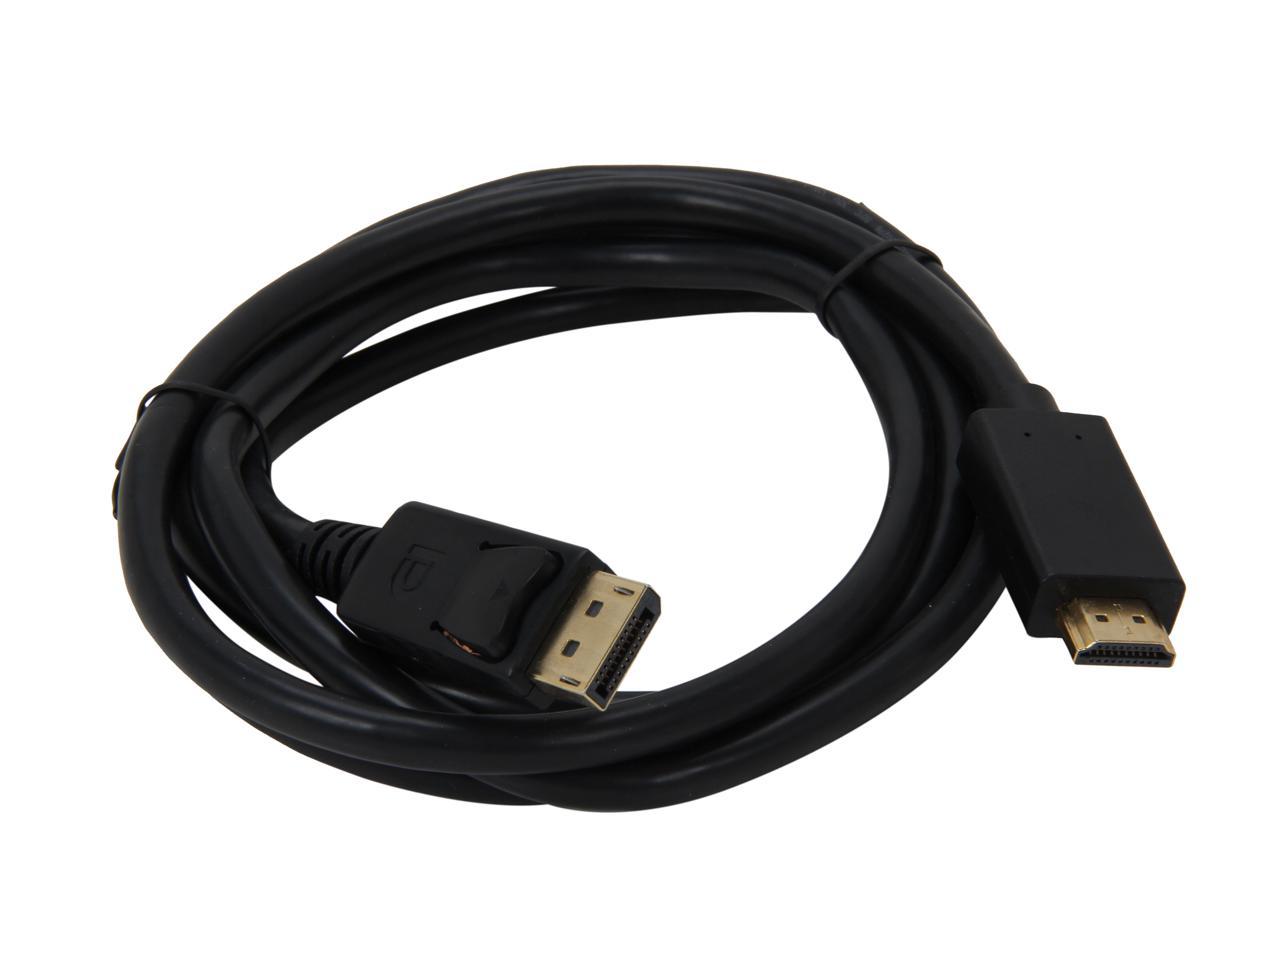 Nippon Labs DP-HDMI-6 6 ft. DisplayPort to HDMI Converter Cable Supporting VR / 3D / 4K, Black - DP to HDMI Adapter - (M/M) - image 2 of 3